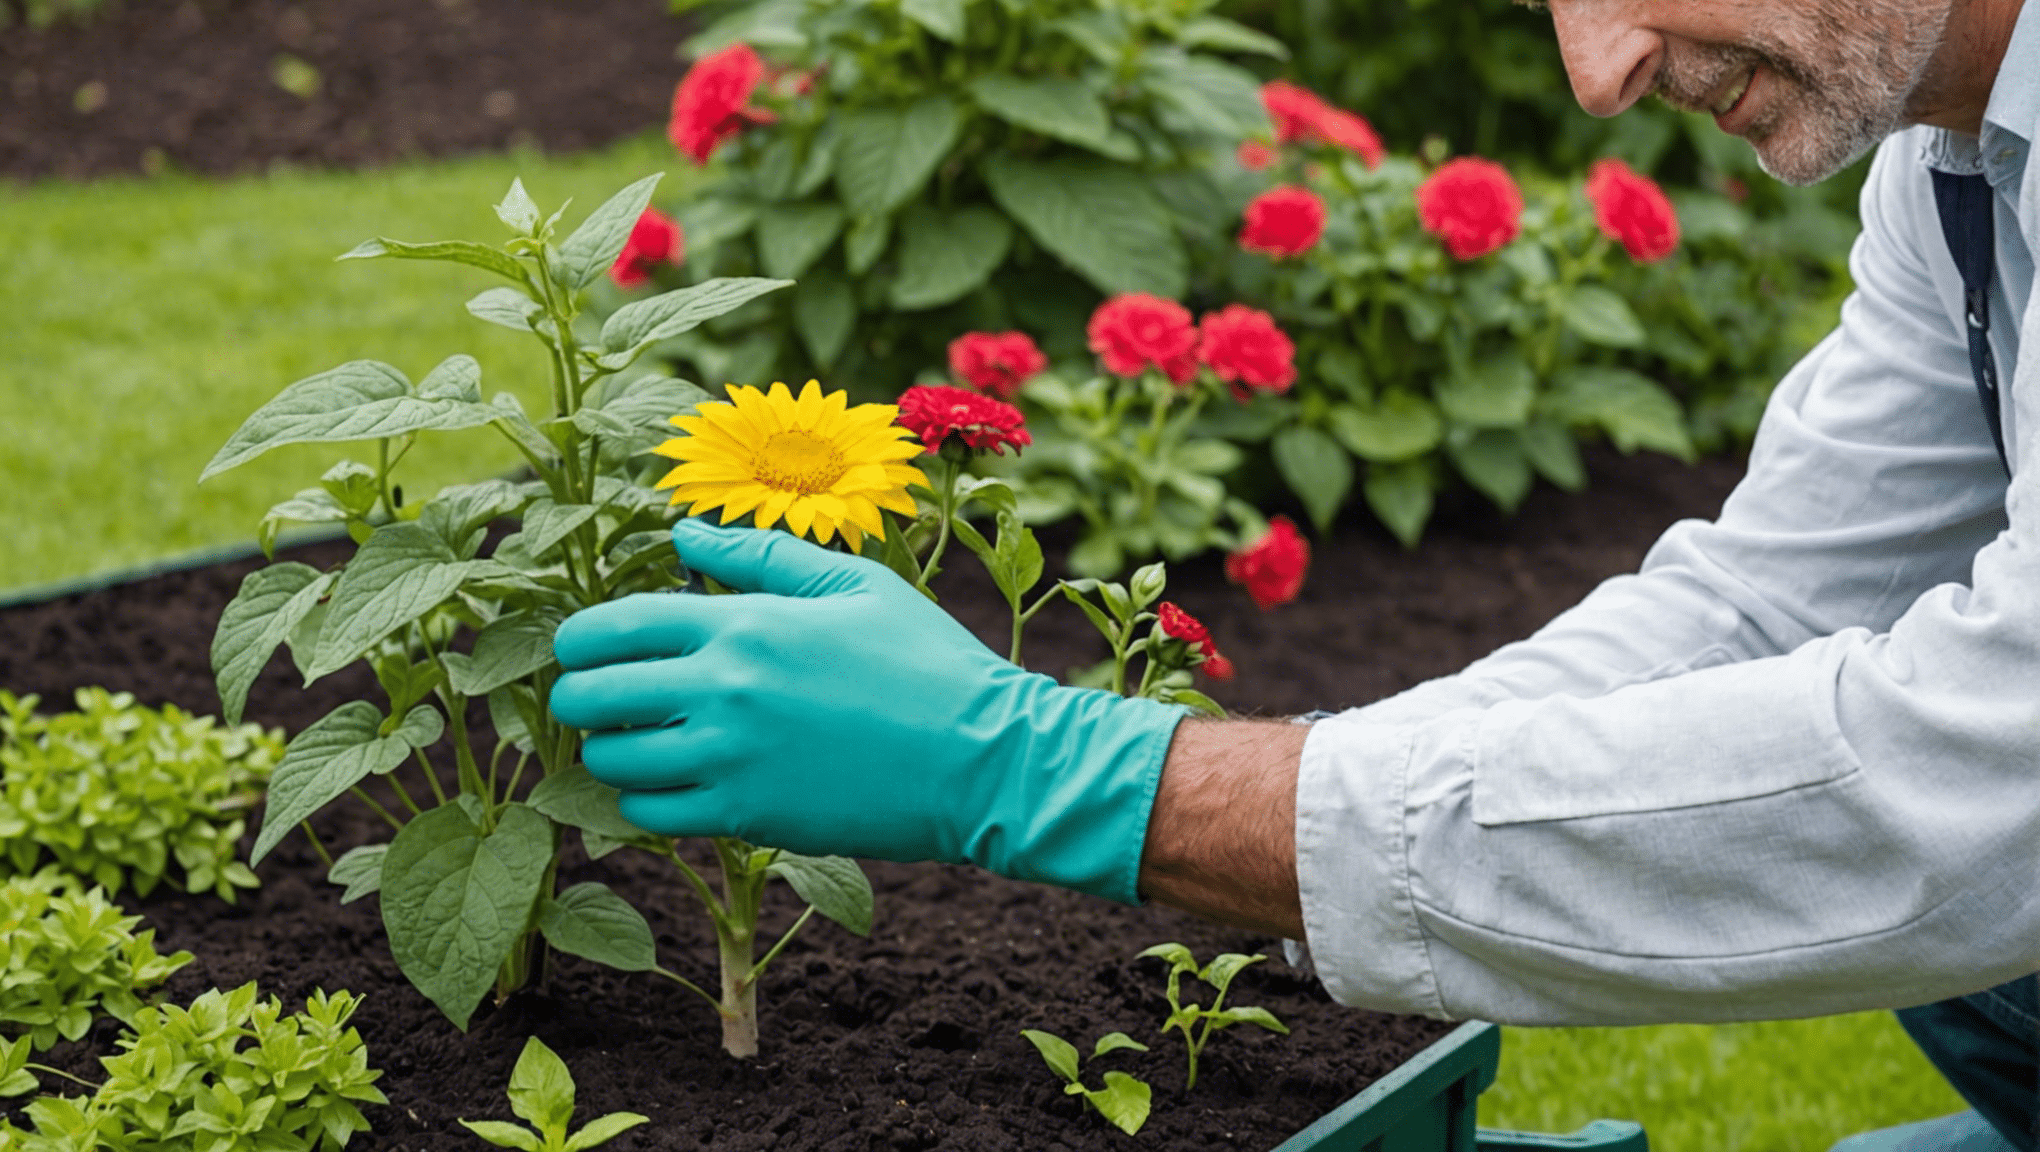 discover if gardening sleeves are worth it with this comprehensive review. get insights on the pros and cons to make an informed decision.